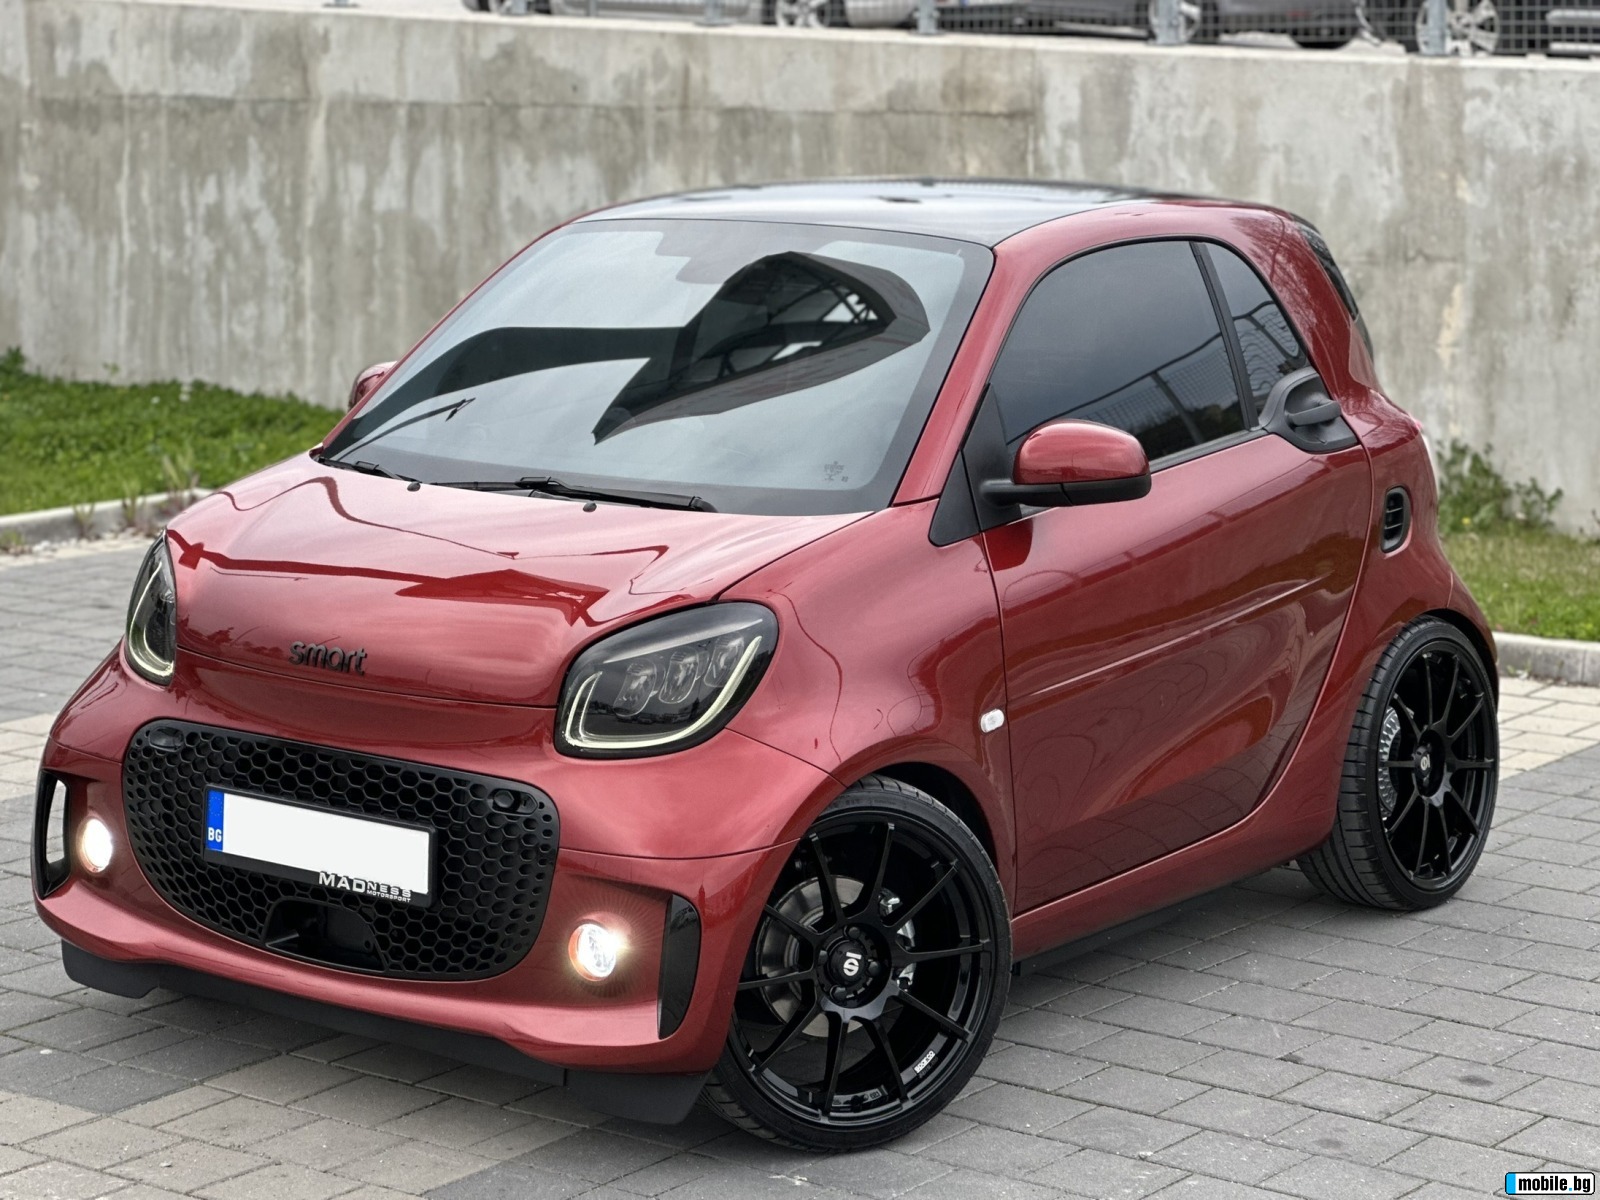 Smart Fortwo EQ Exclusive   2300   LED    | Mobile.bg   5